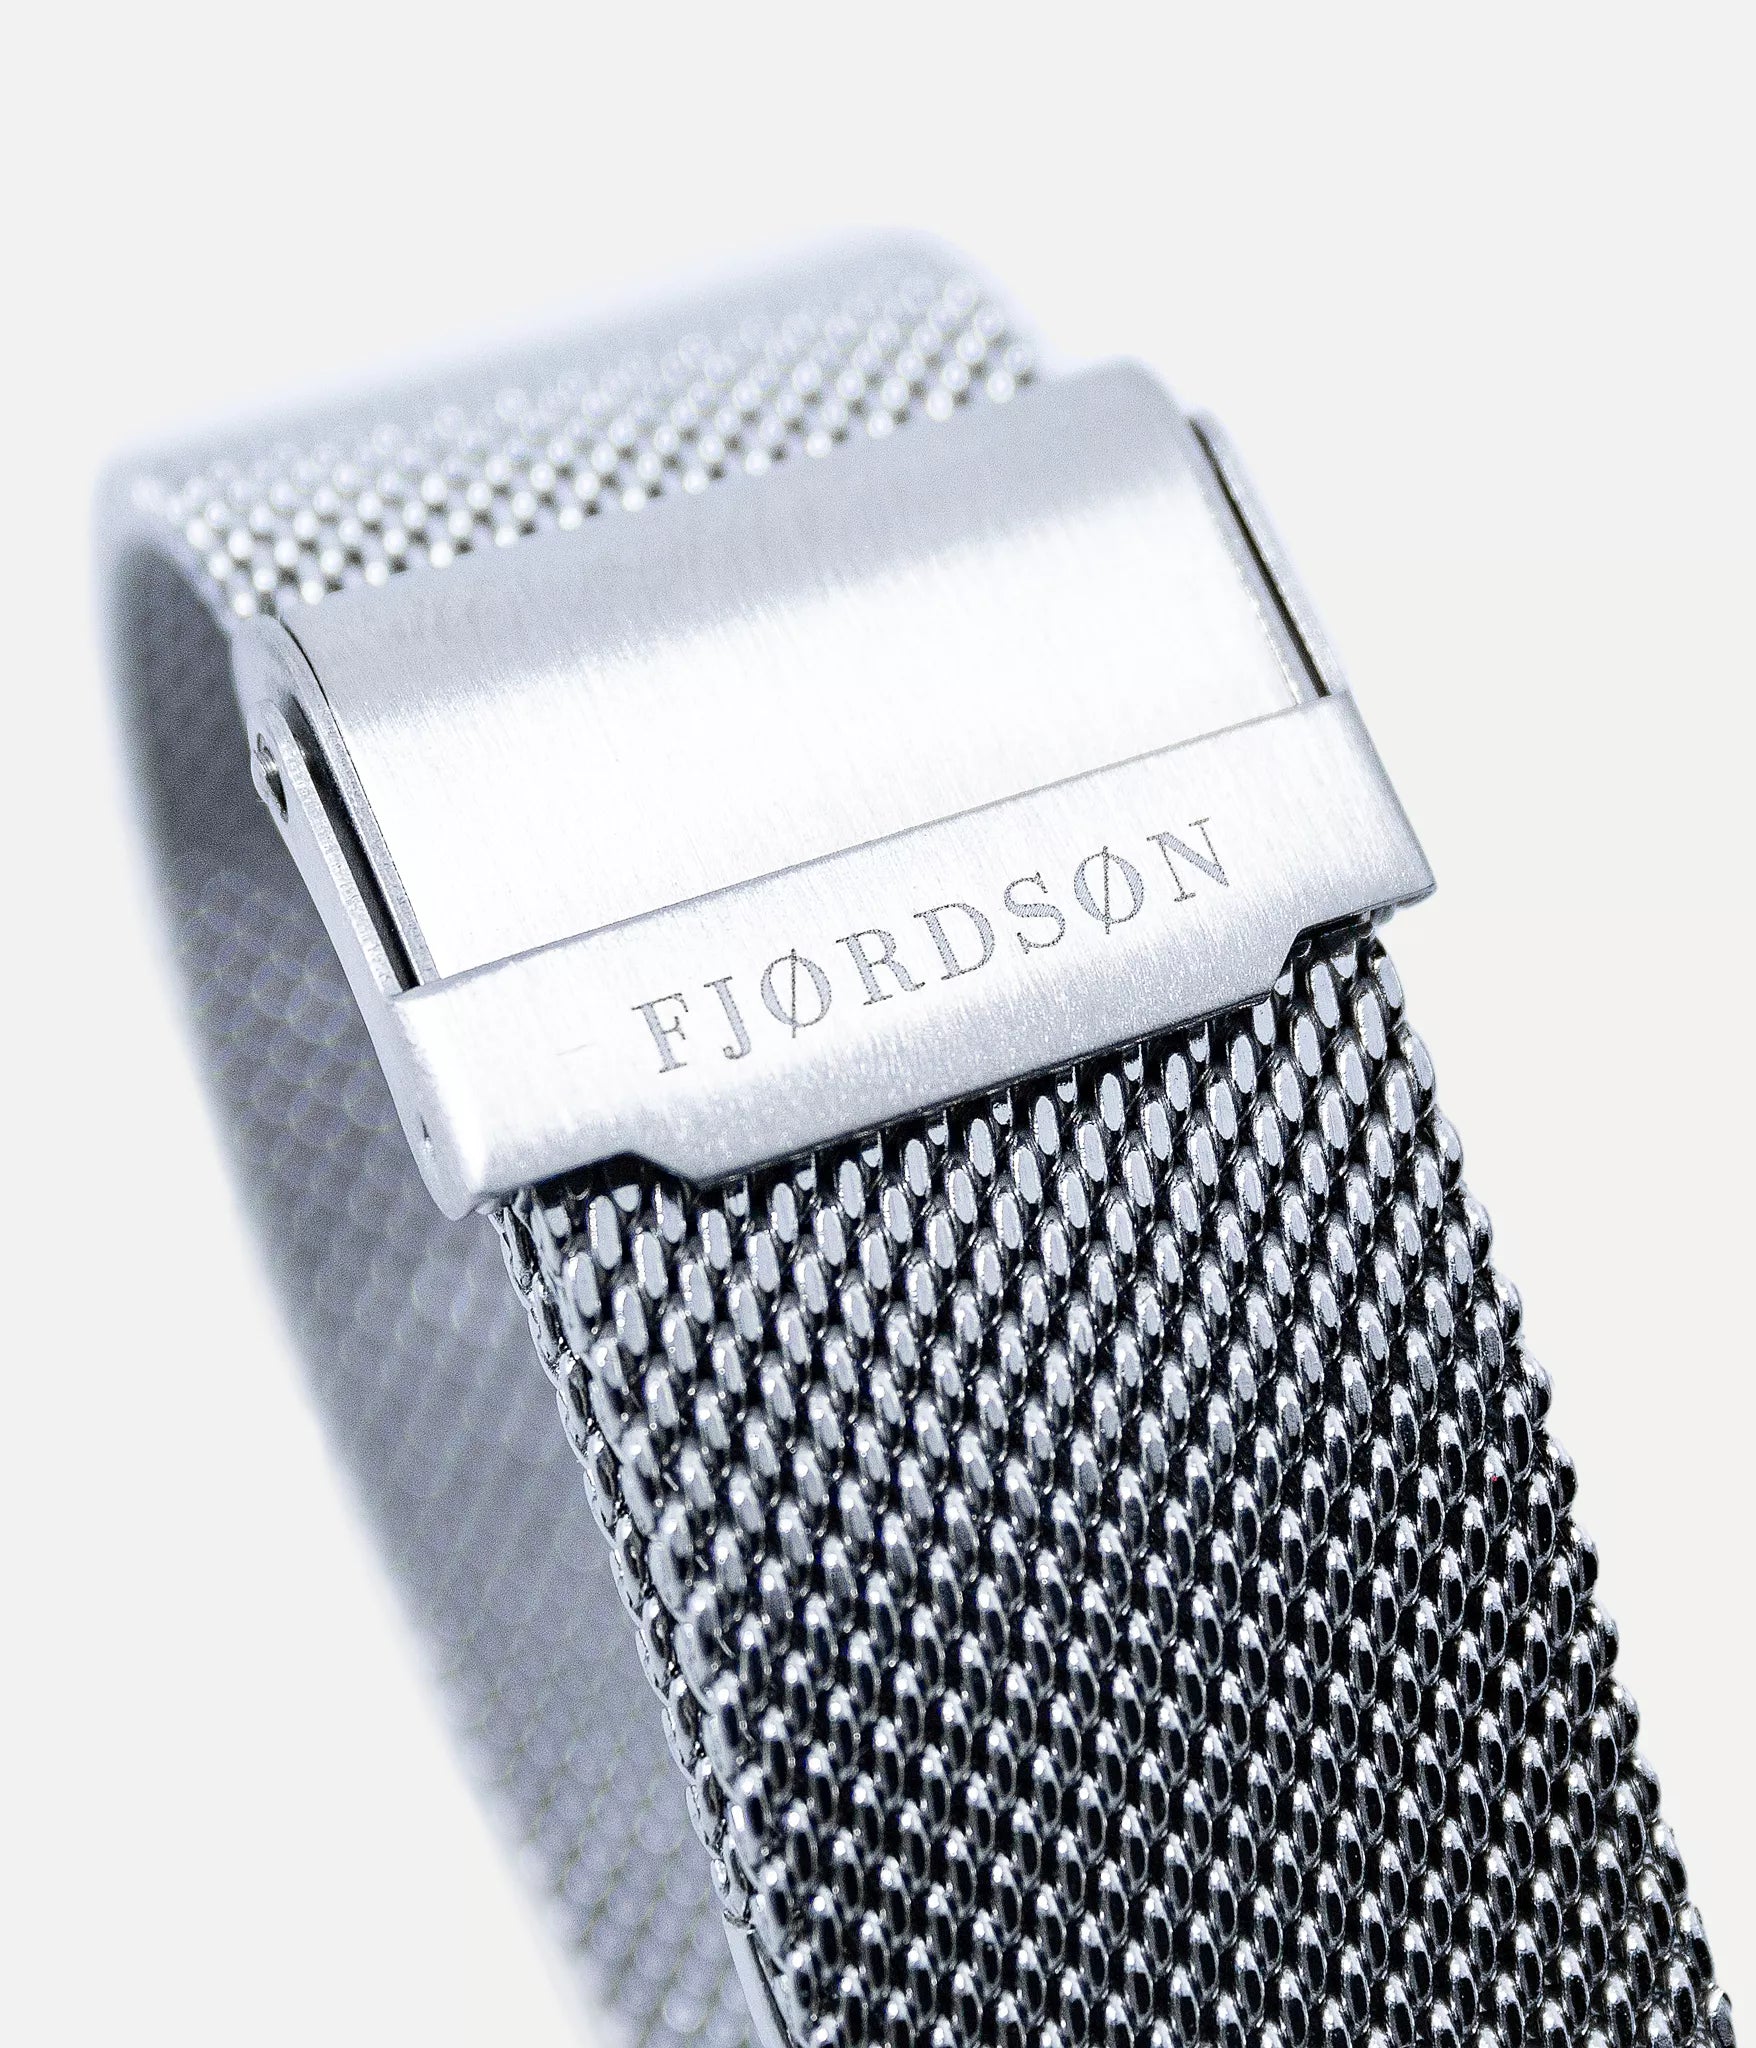 Watch strap lock shot - Fjordson watch with white dial and silver mesh watch strap - Women's Watch - vegan & approved by PETA - Swiss made